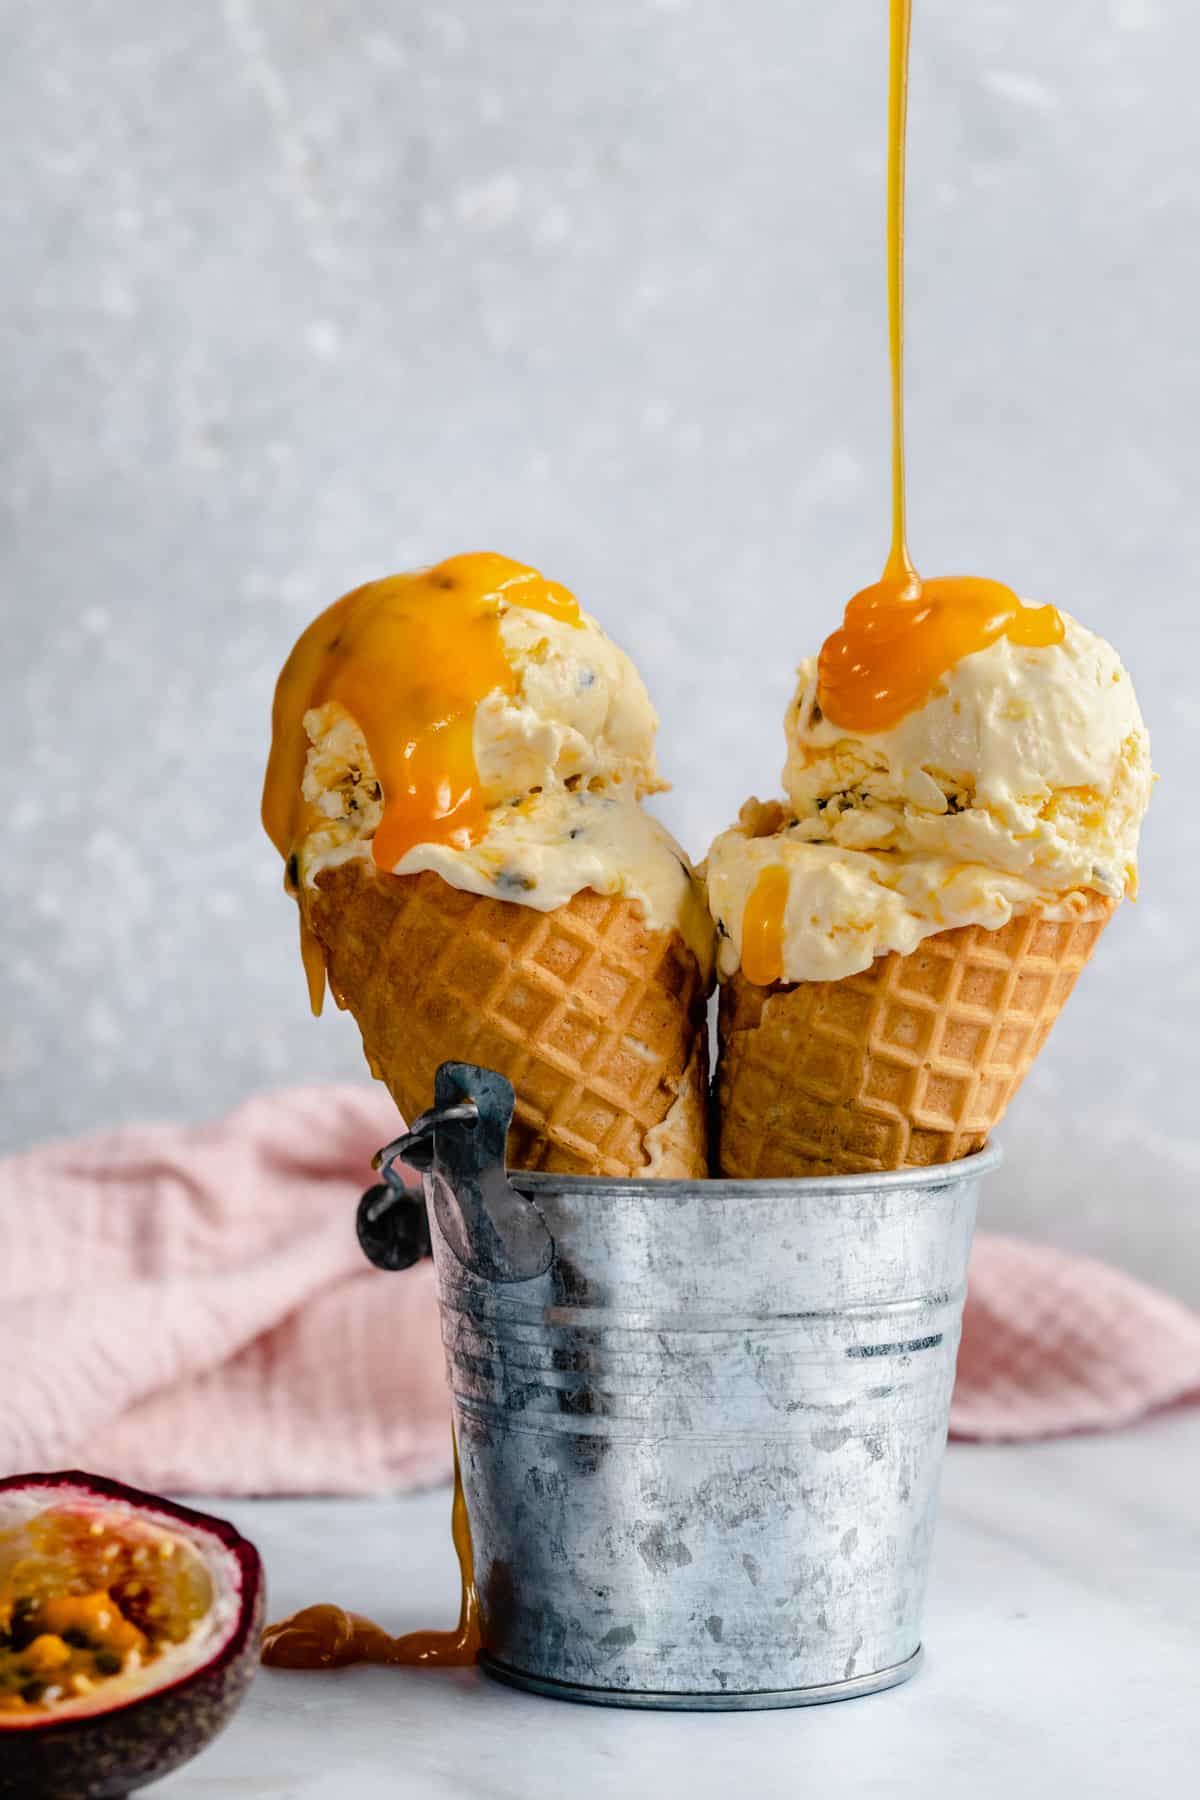 Two waffle cones with scoops of passion fruit ice cream with curd drizzled on the top.